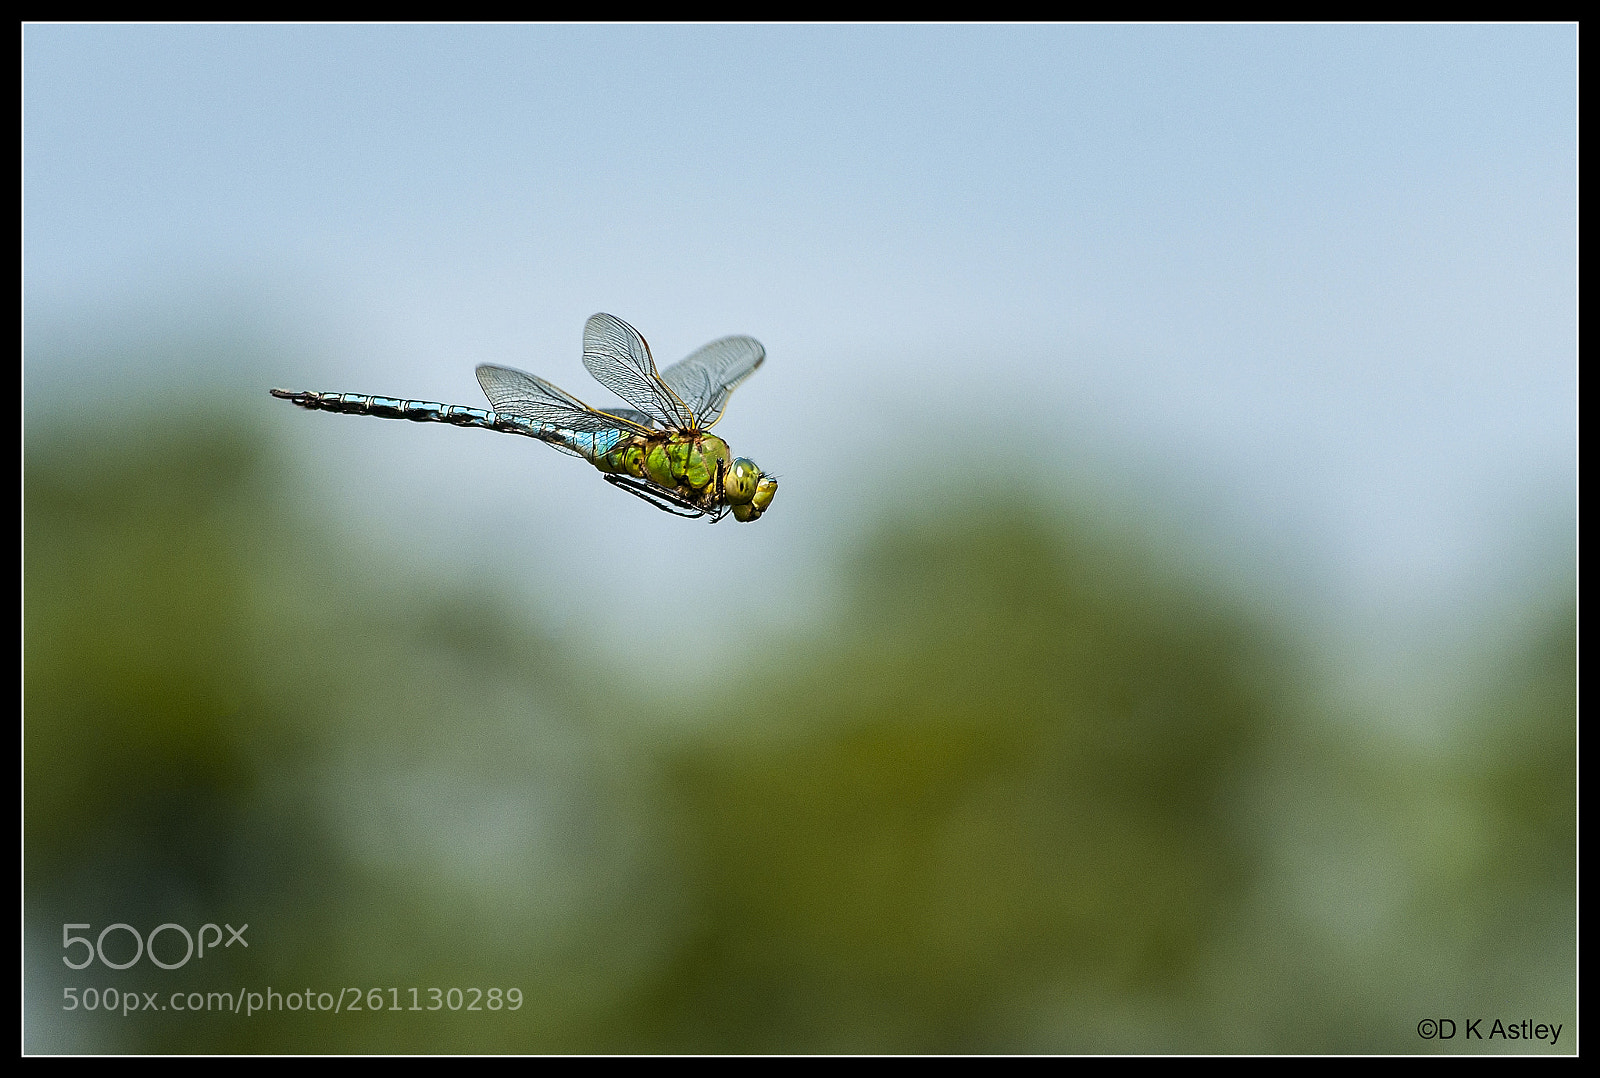 Nikon D300 sample photo. Hawker dragonfly in flight photography